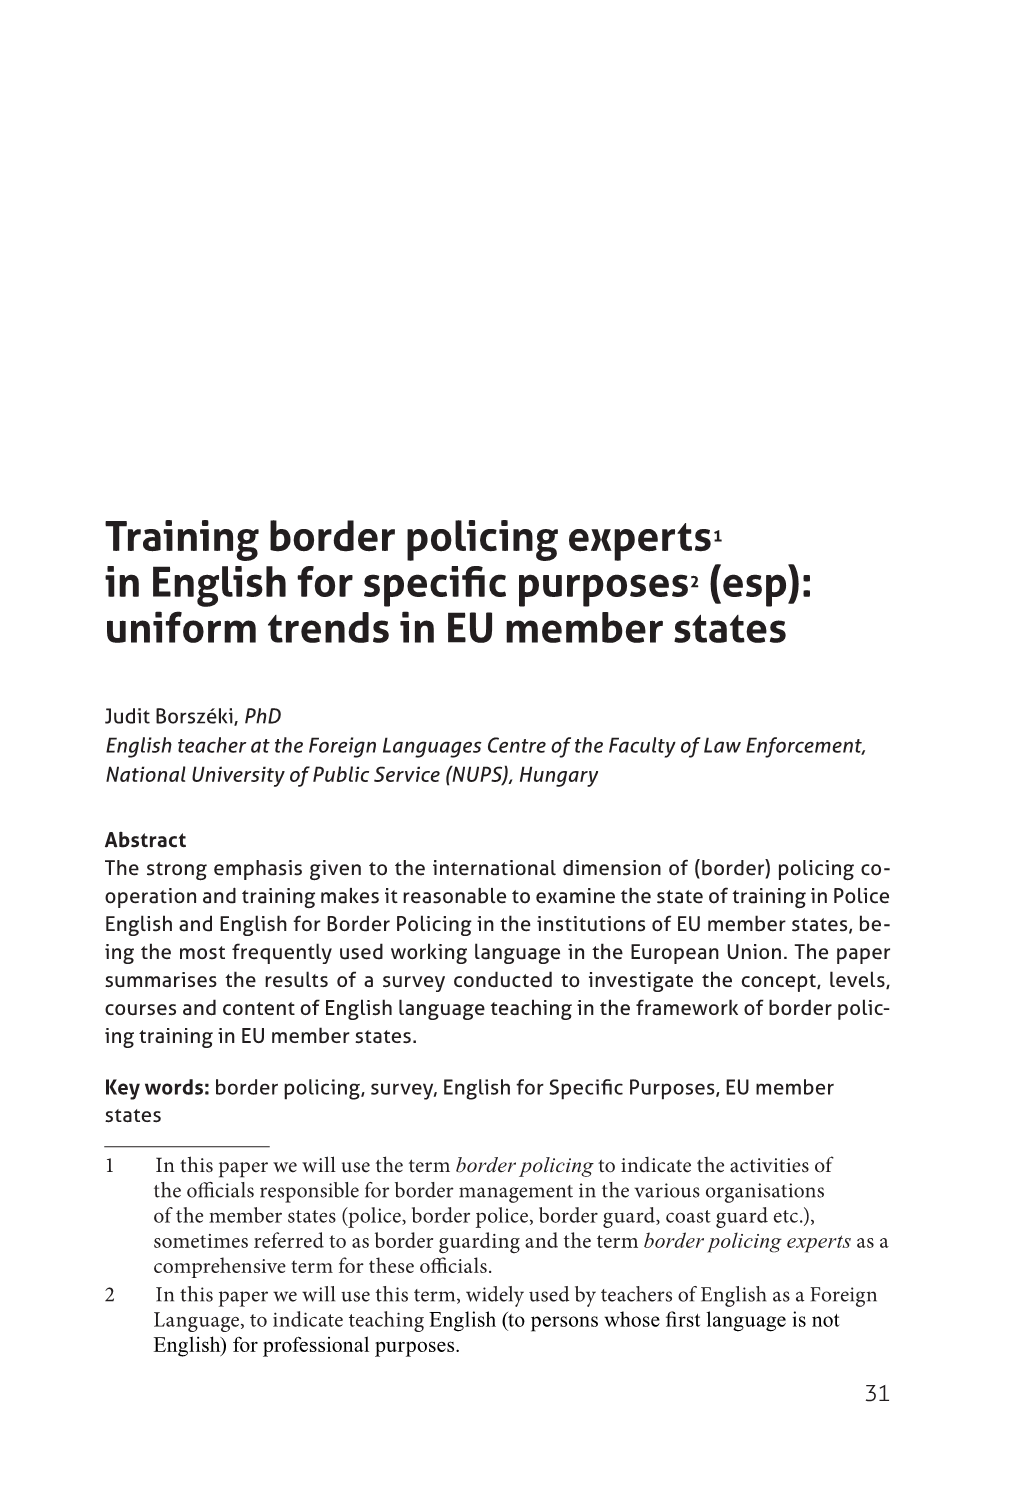 Training Border Policing Experts1 in English for Specific Purposes2 (Esp): Uniform Trends in EU Member States